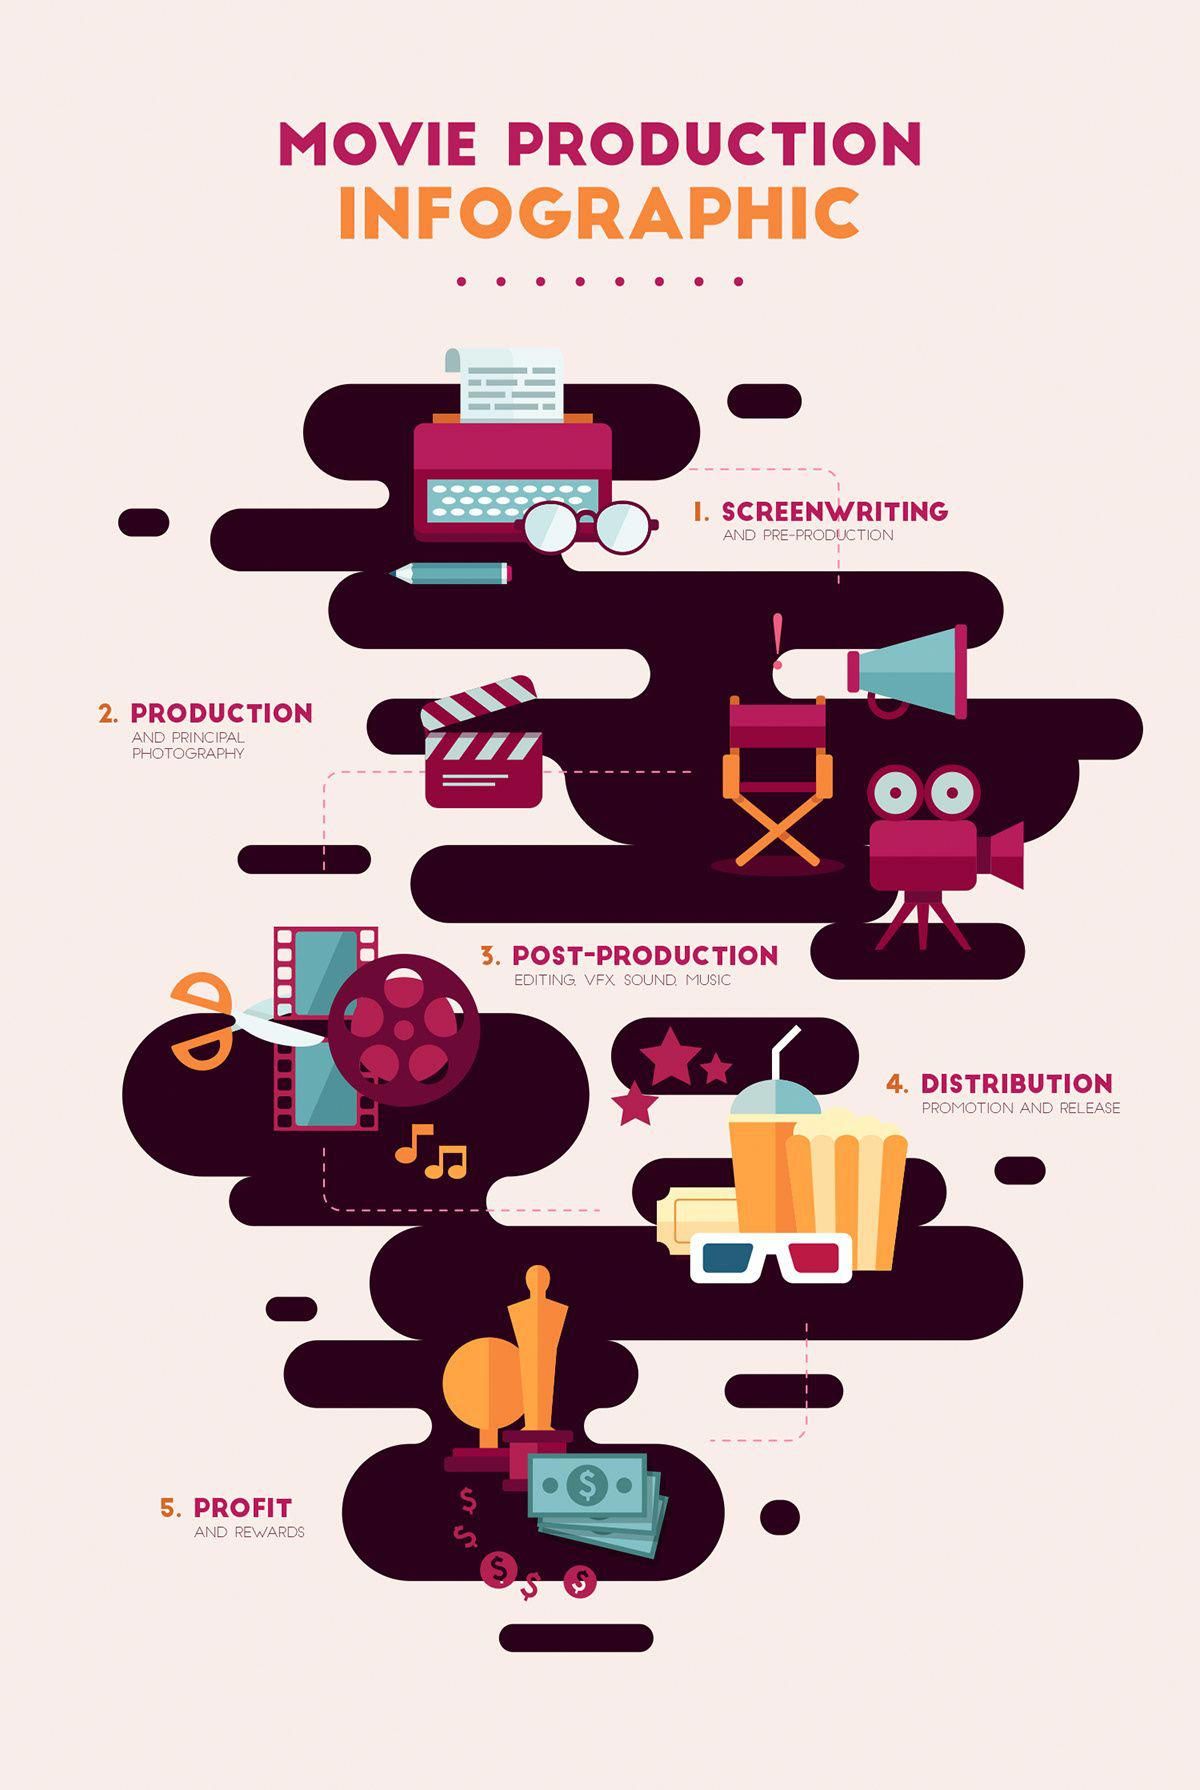 11+ Creative Infographic Ideas, Templates & Examples  Daily Design Inspiration #33 | Creative ...